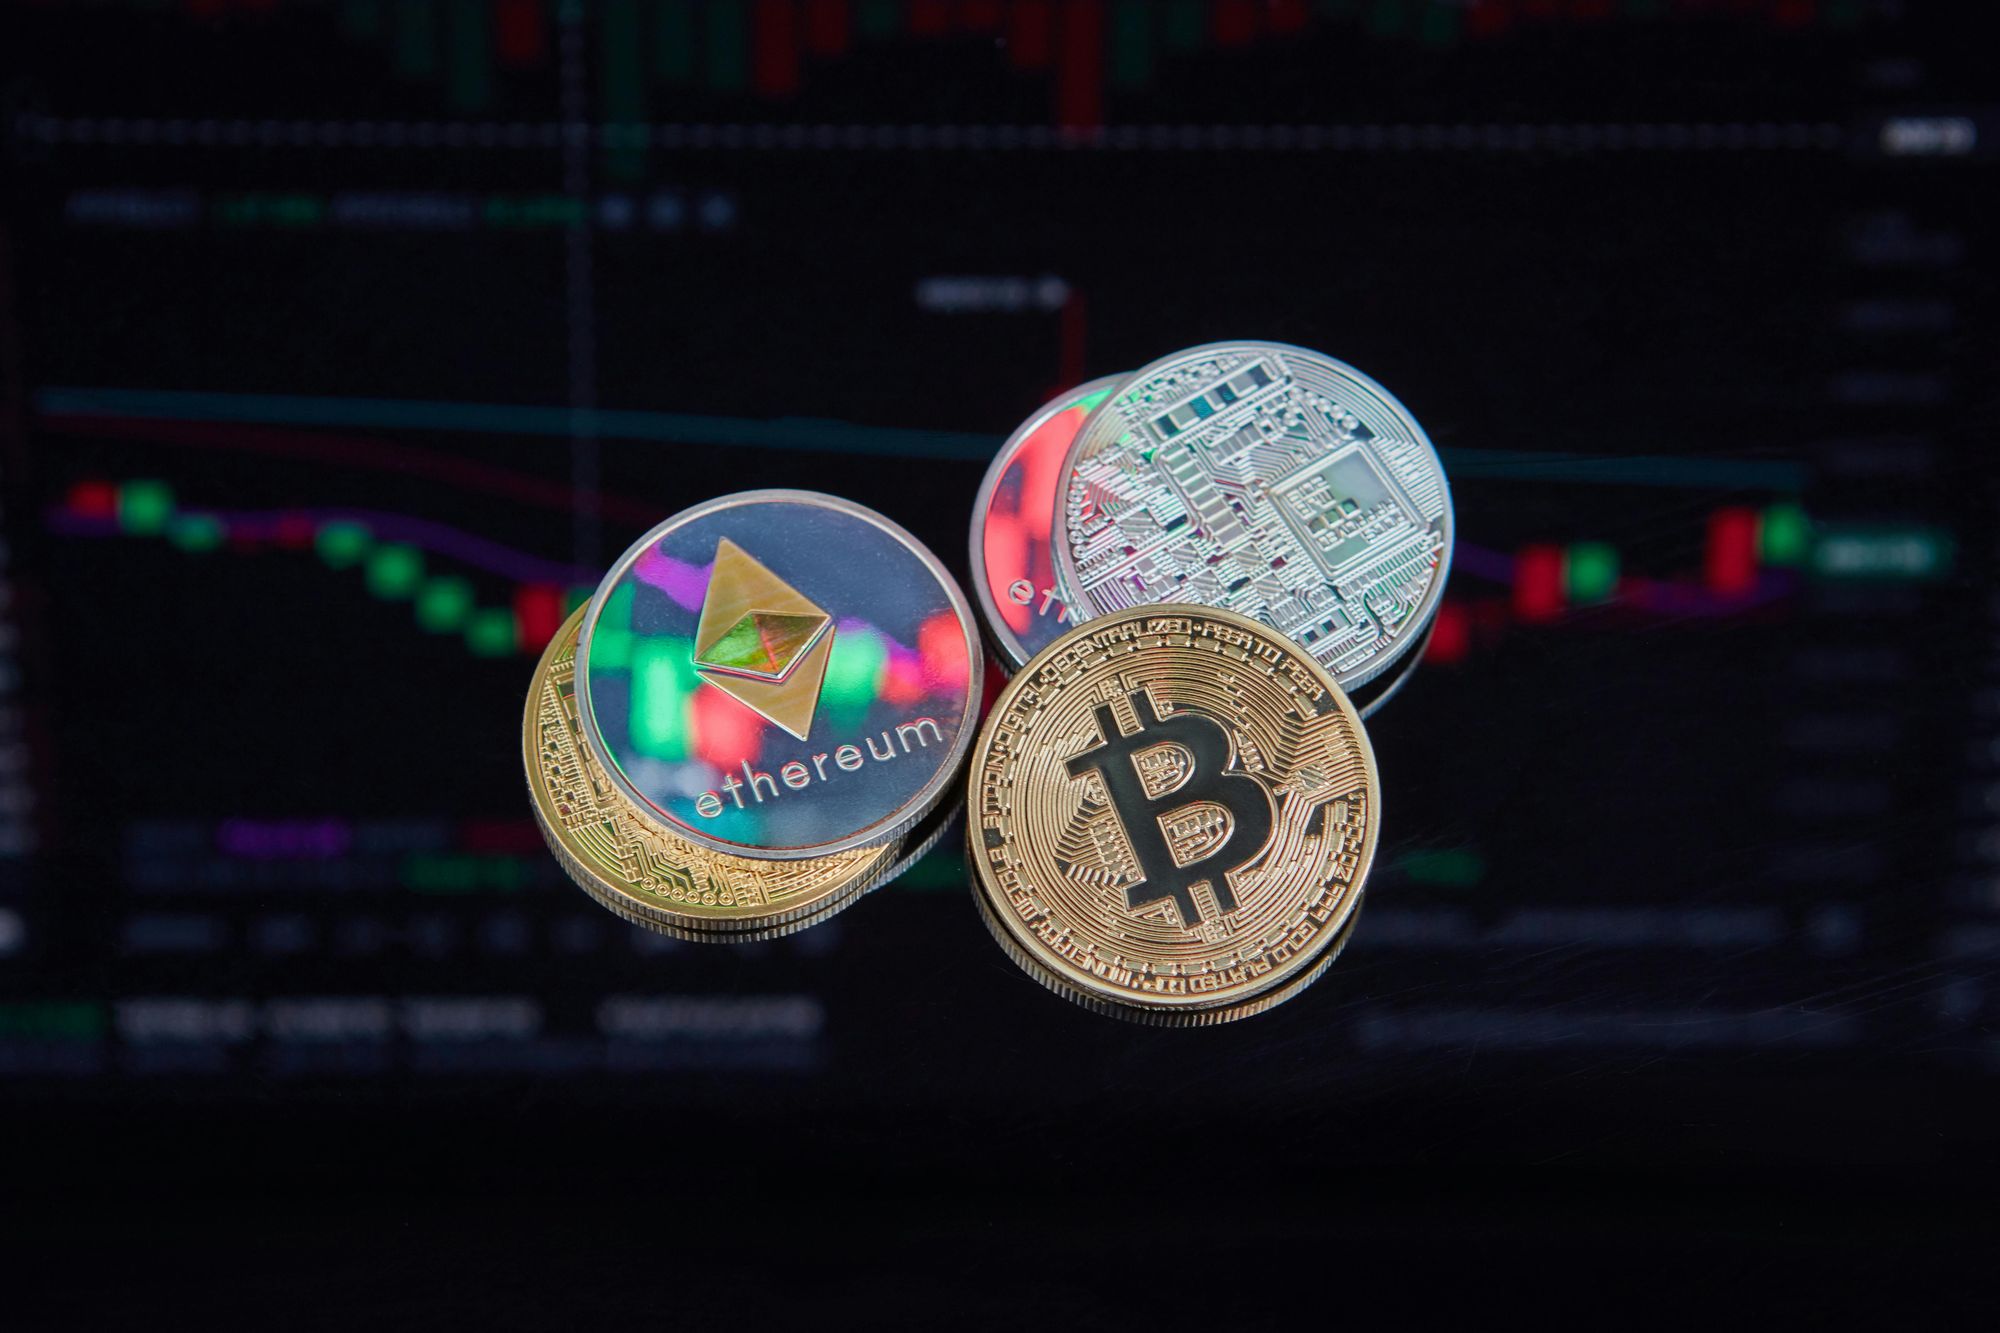 Choosing between stocks and cryptocurrency